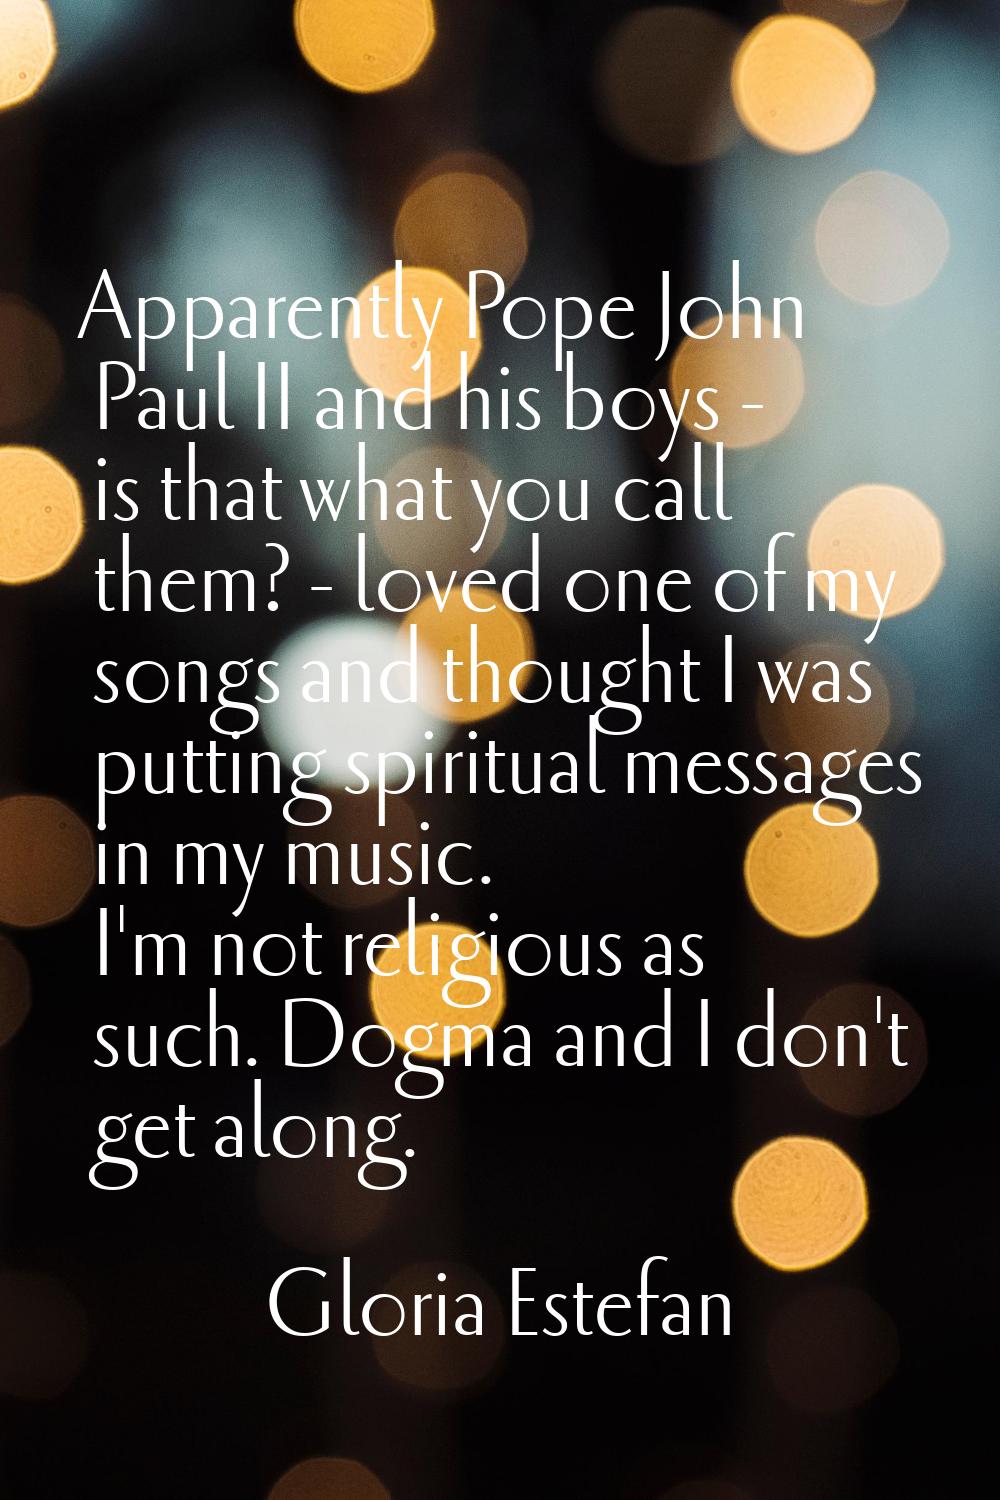 Apparently Pope John Paul II and his boys - is that what you call them? - loved one of my songs and